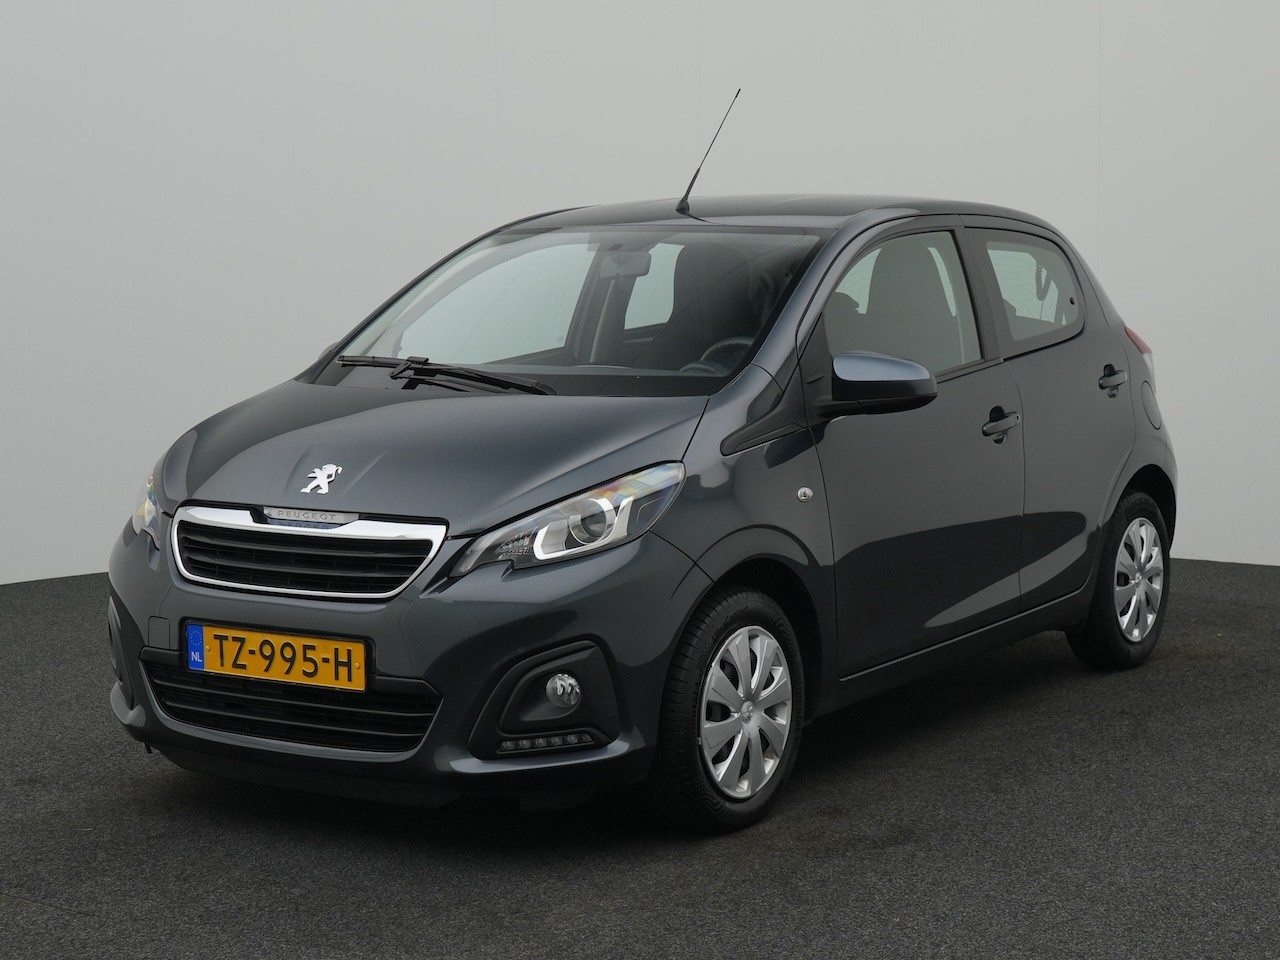 Primary Image peugeot and 108